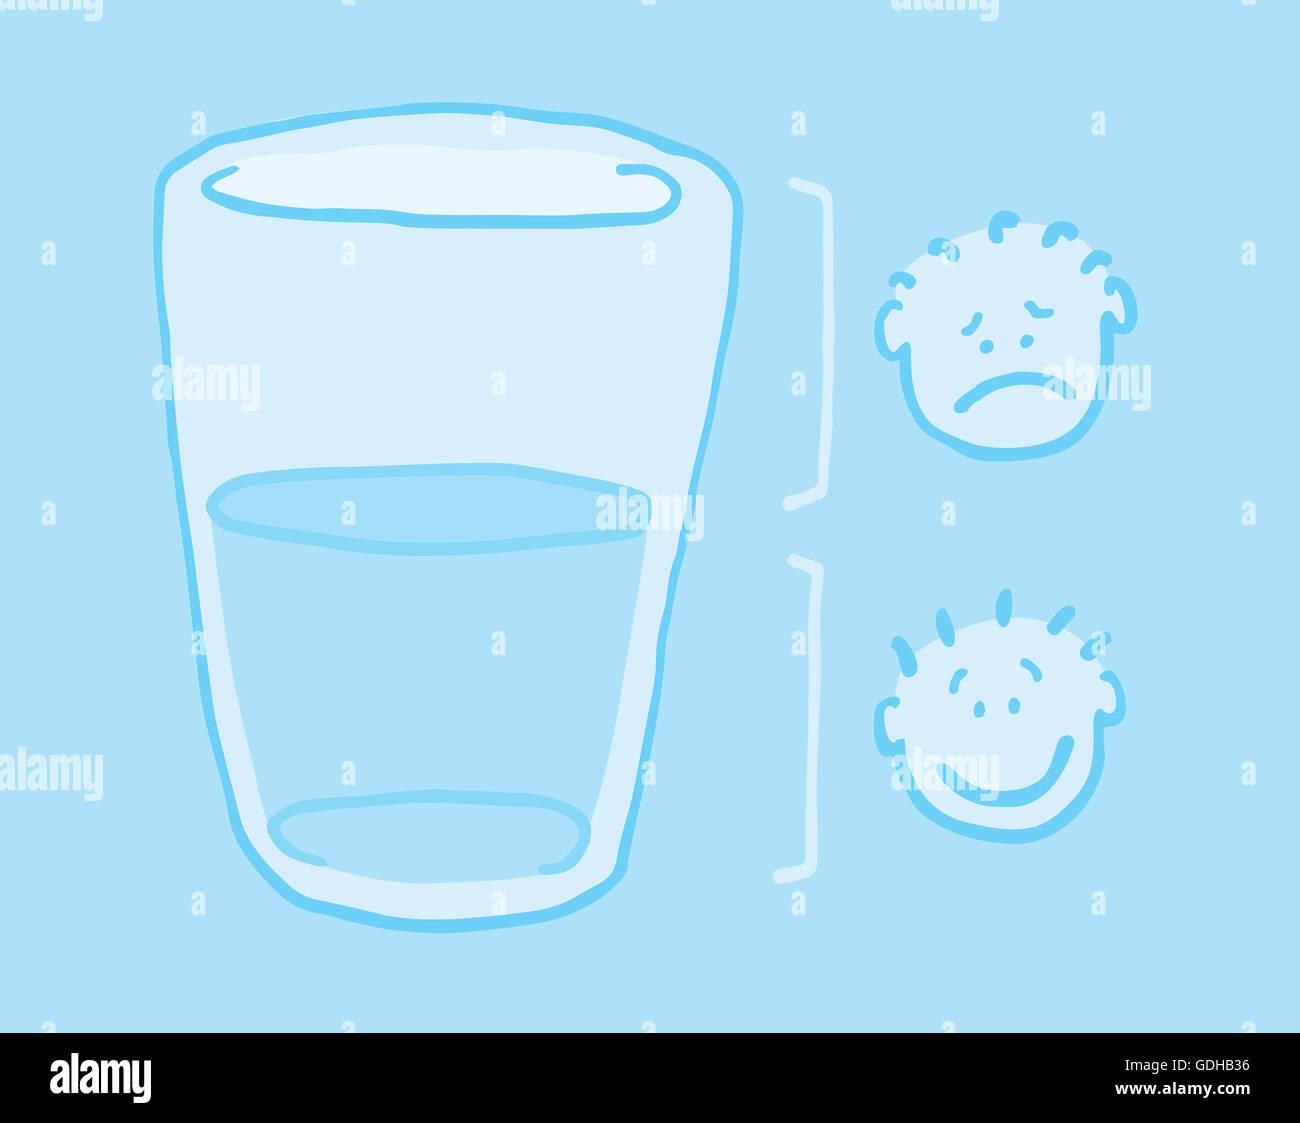 Cartoon illustration of two people looking at the glass half full and half empty Stock Photo